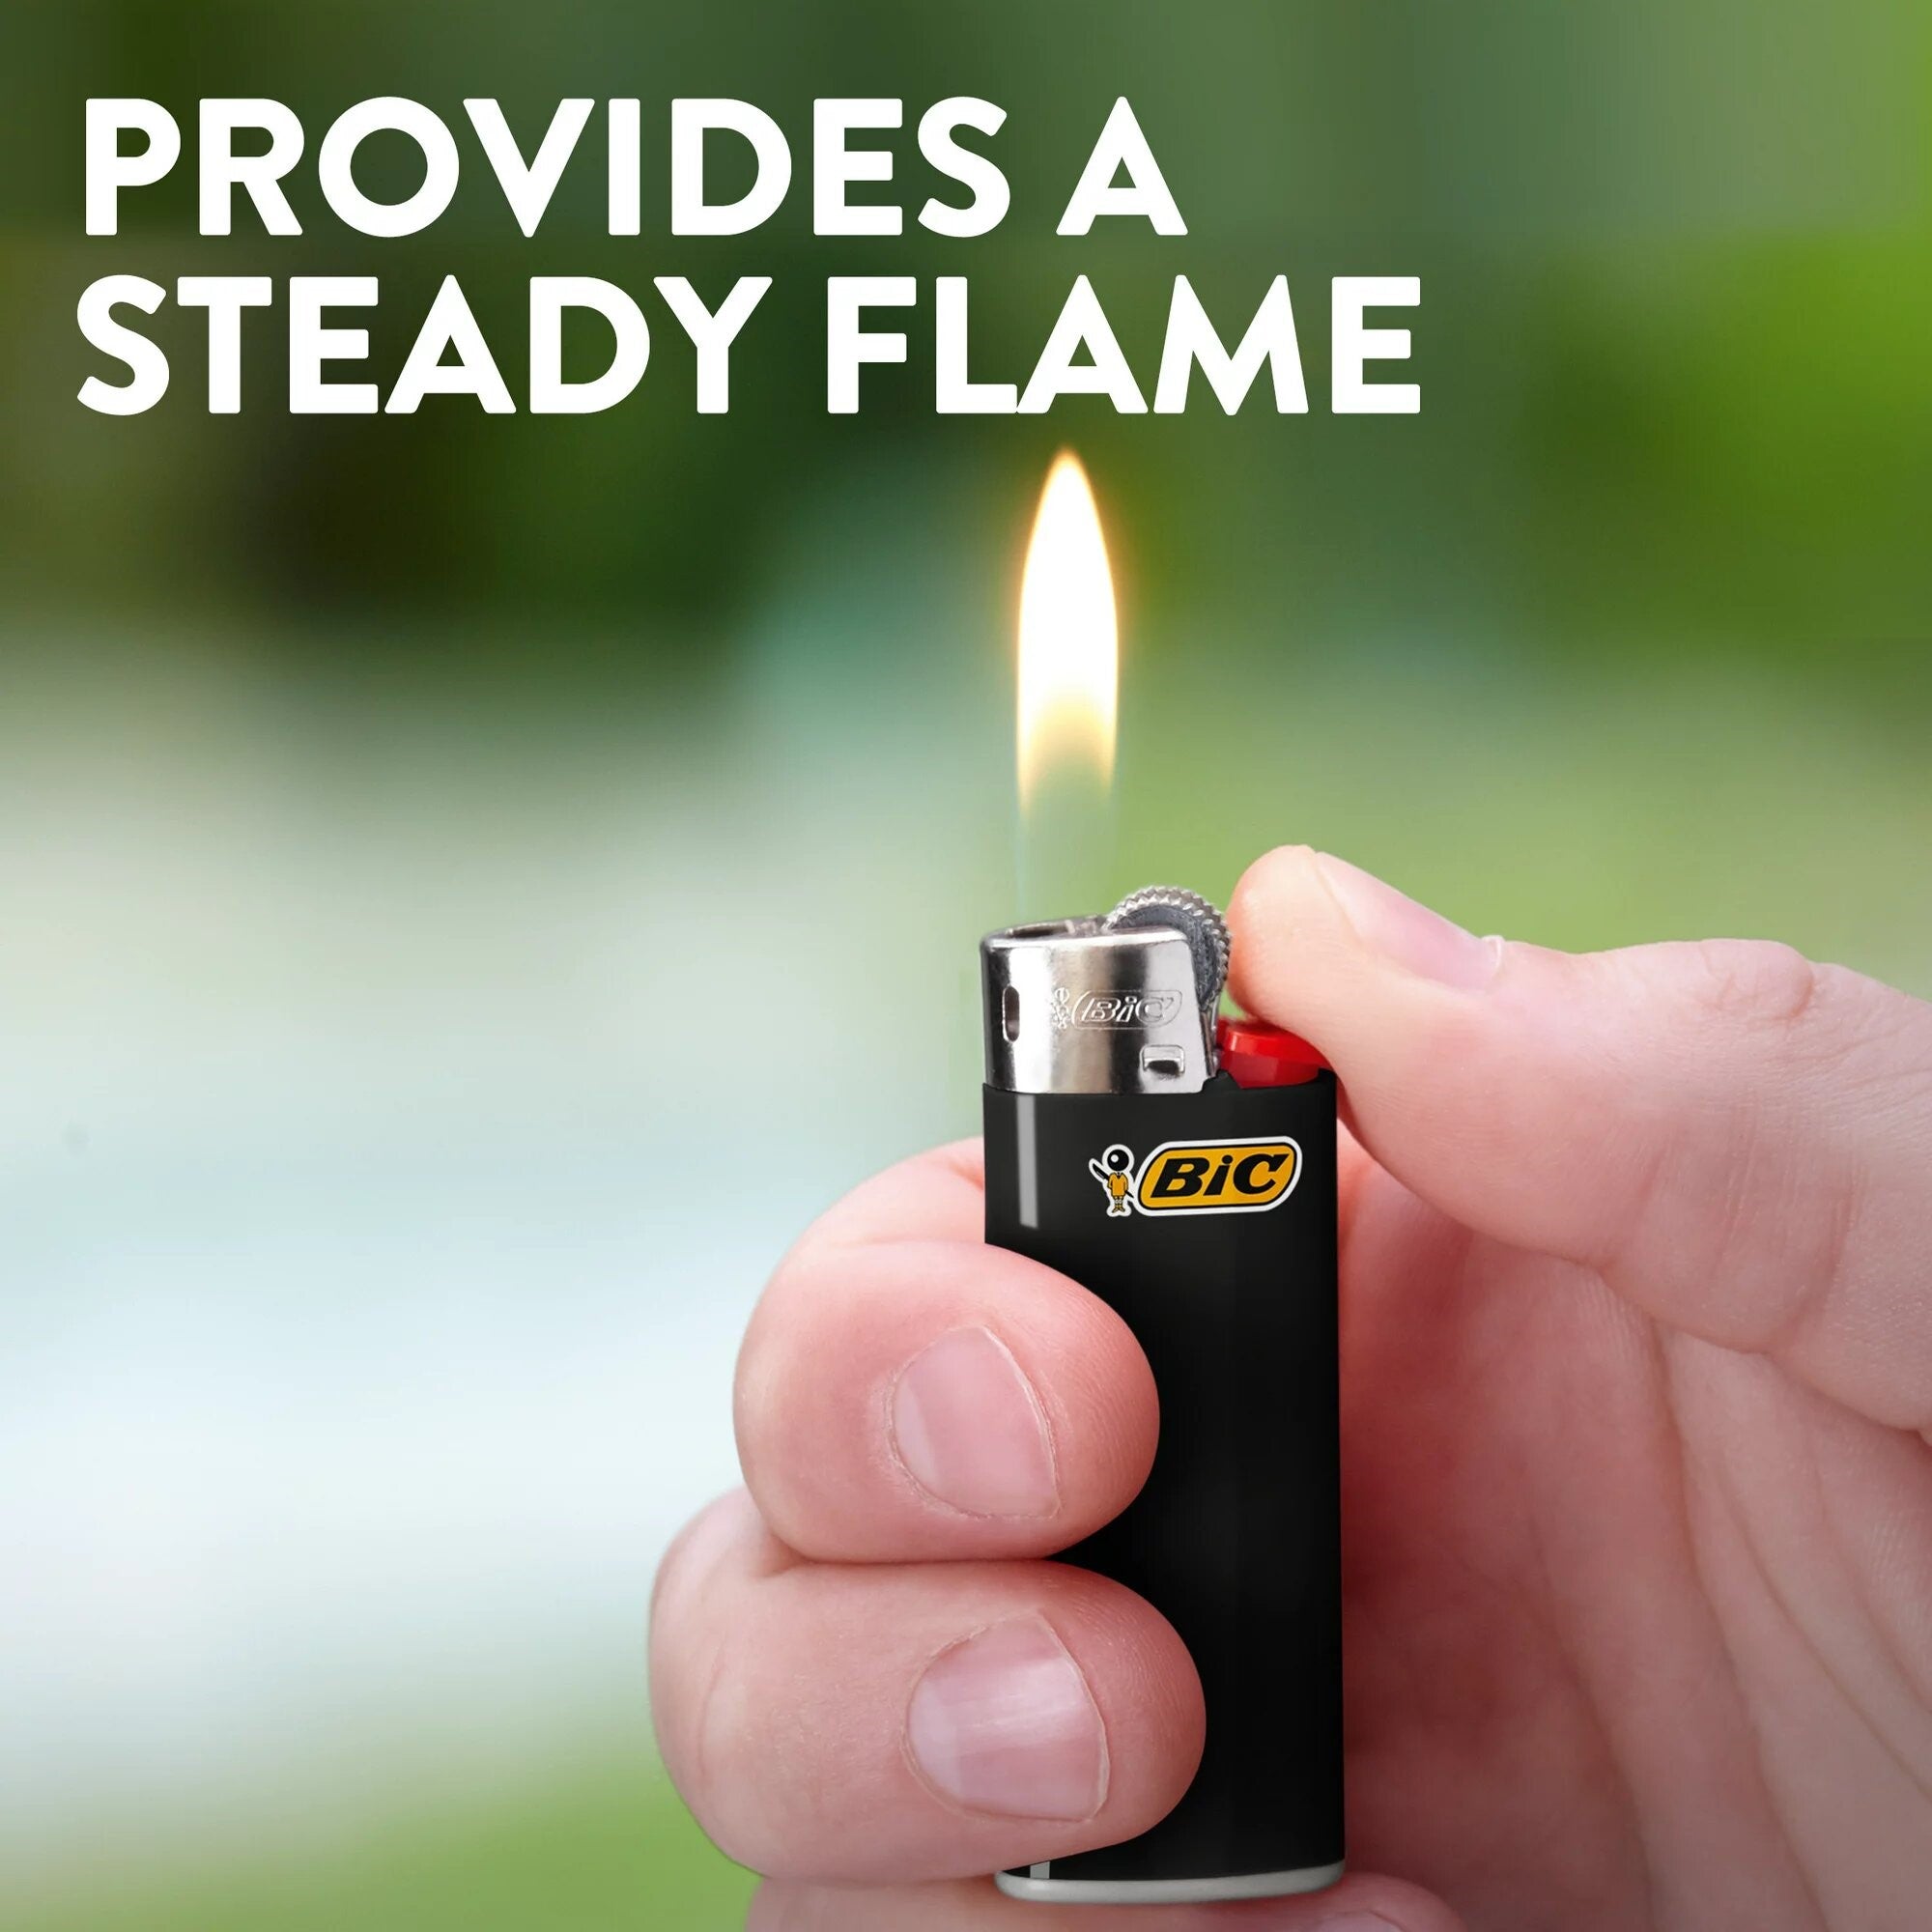 Superior flame even at 45 degrees of BiC lighters, Mini j5